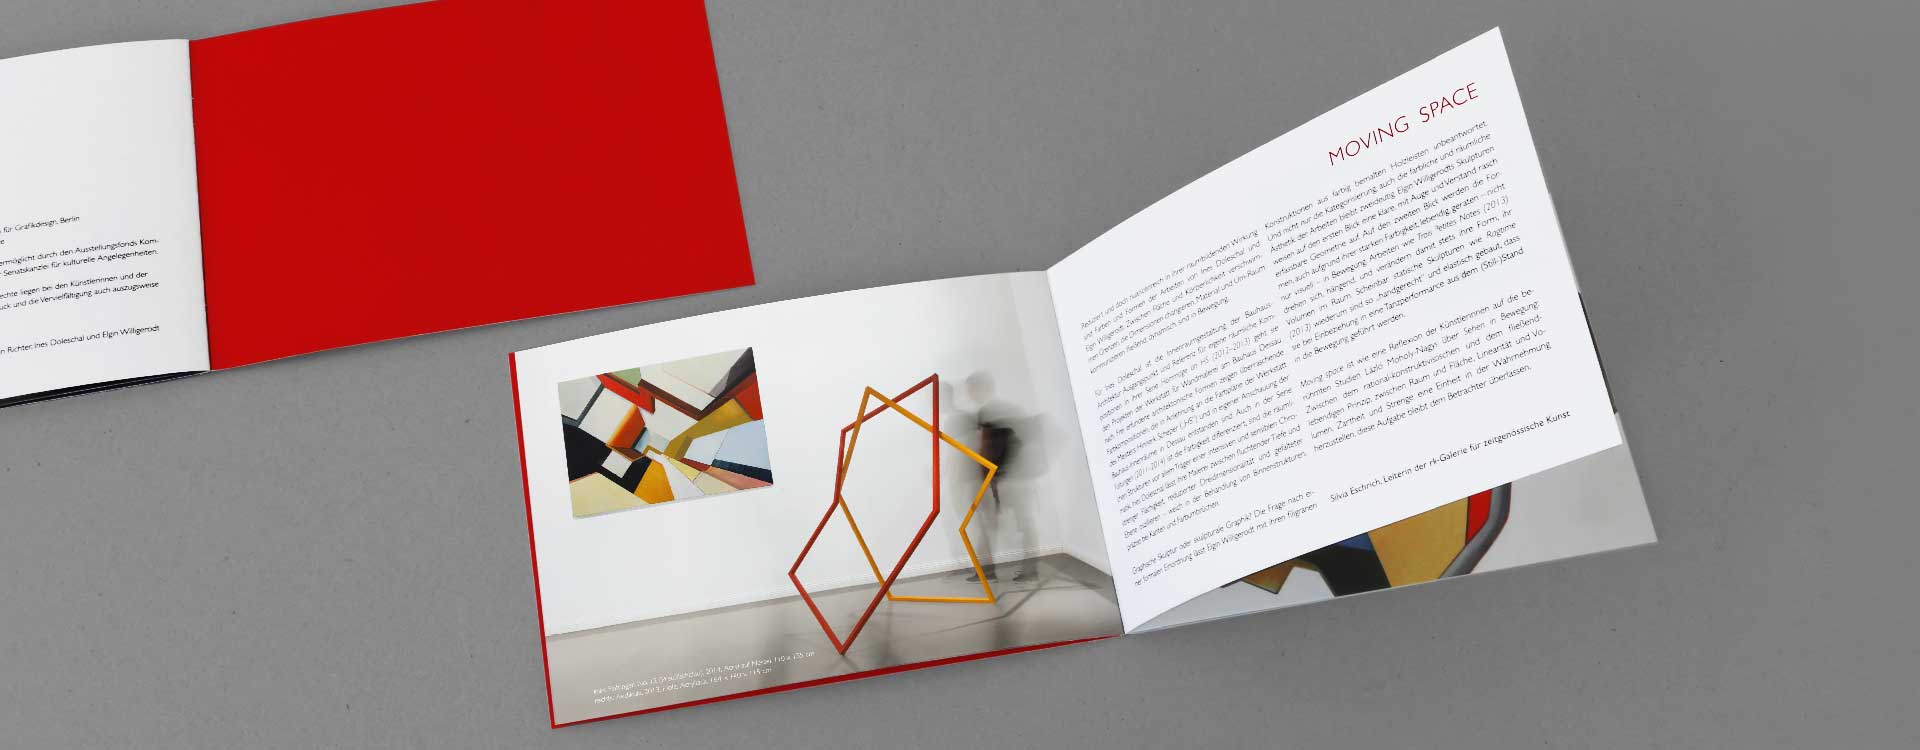 Catalogue Moving Space in the rk Gallery for Contemporary Art, Berlin; Design: Kattrin Richter | Graphic Design Studio